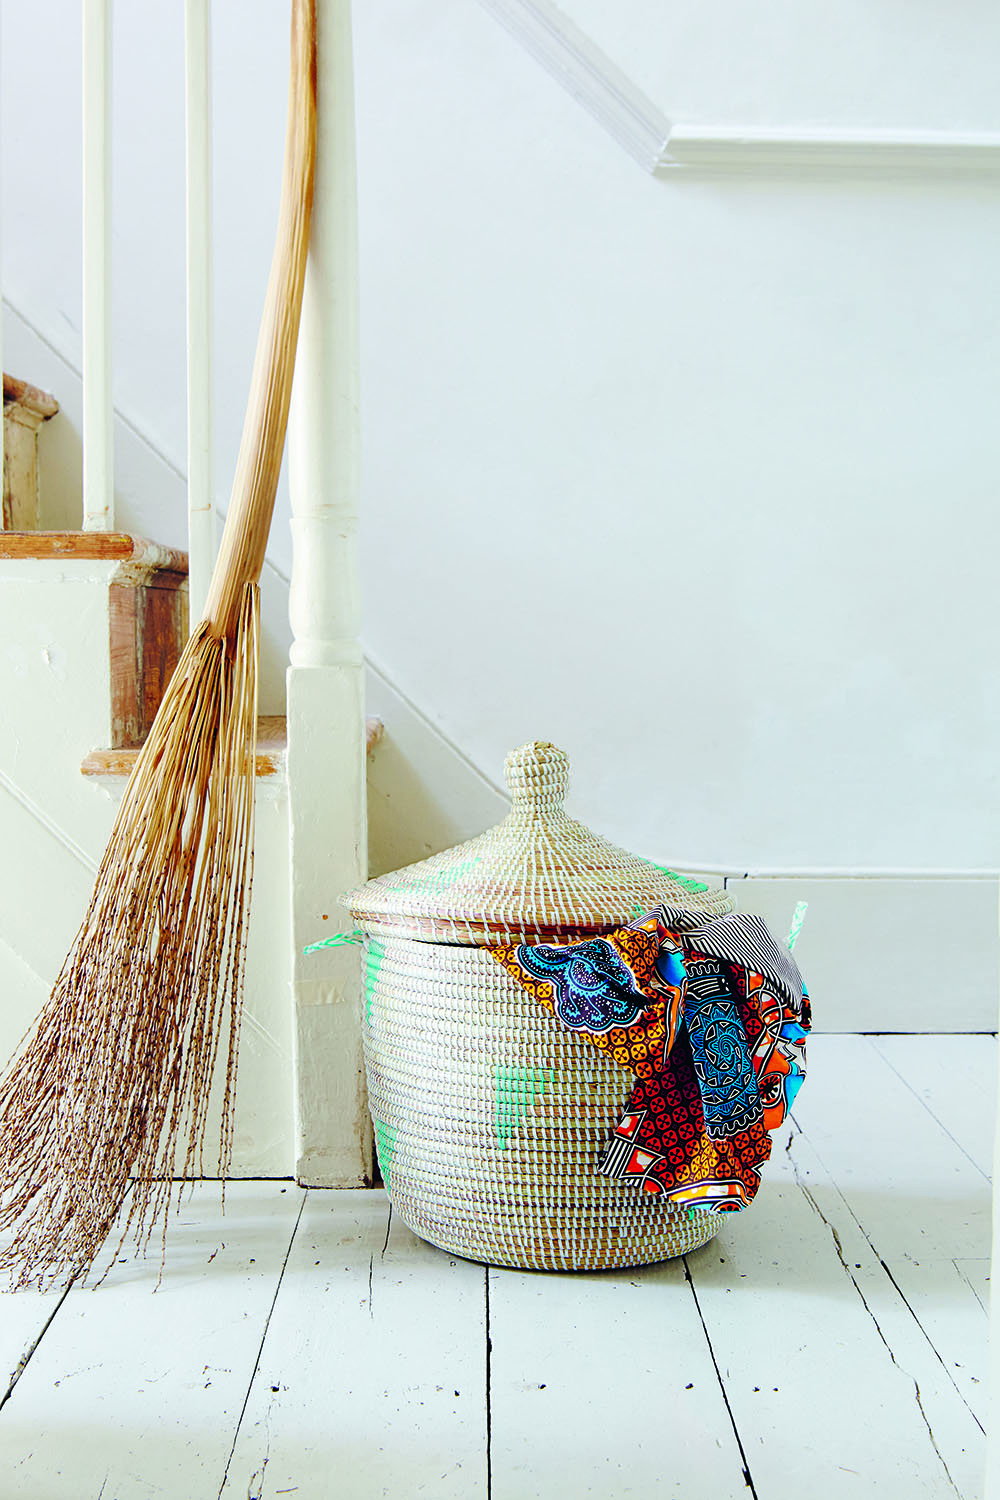 Make your own woven laundry basket